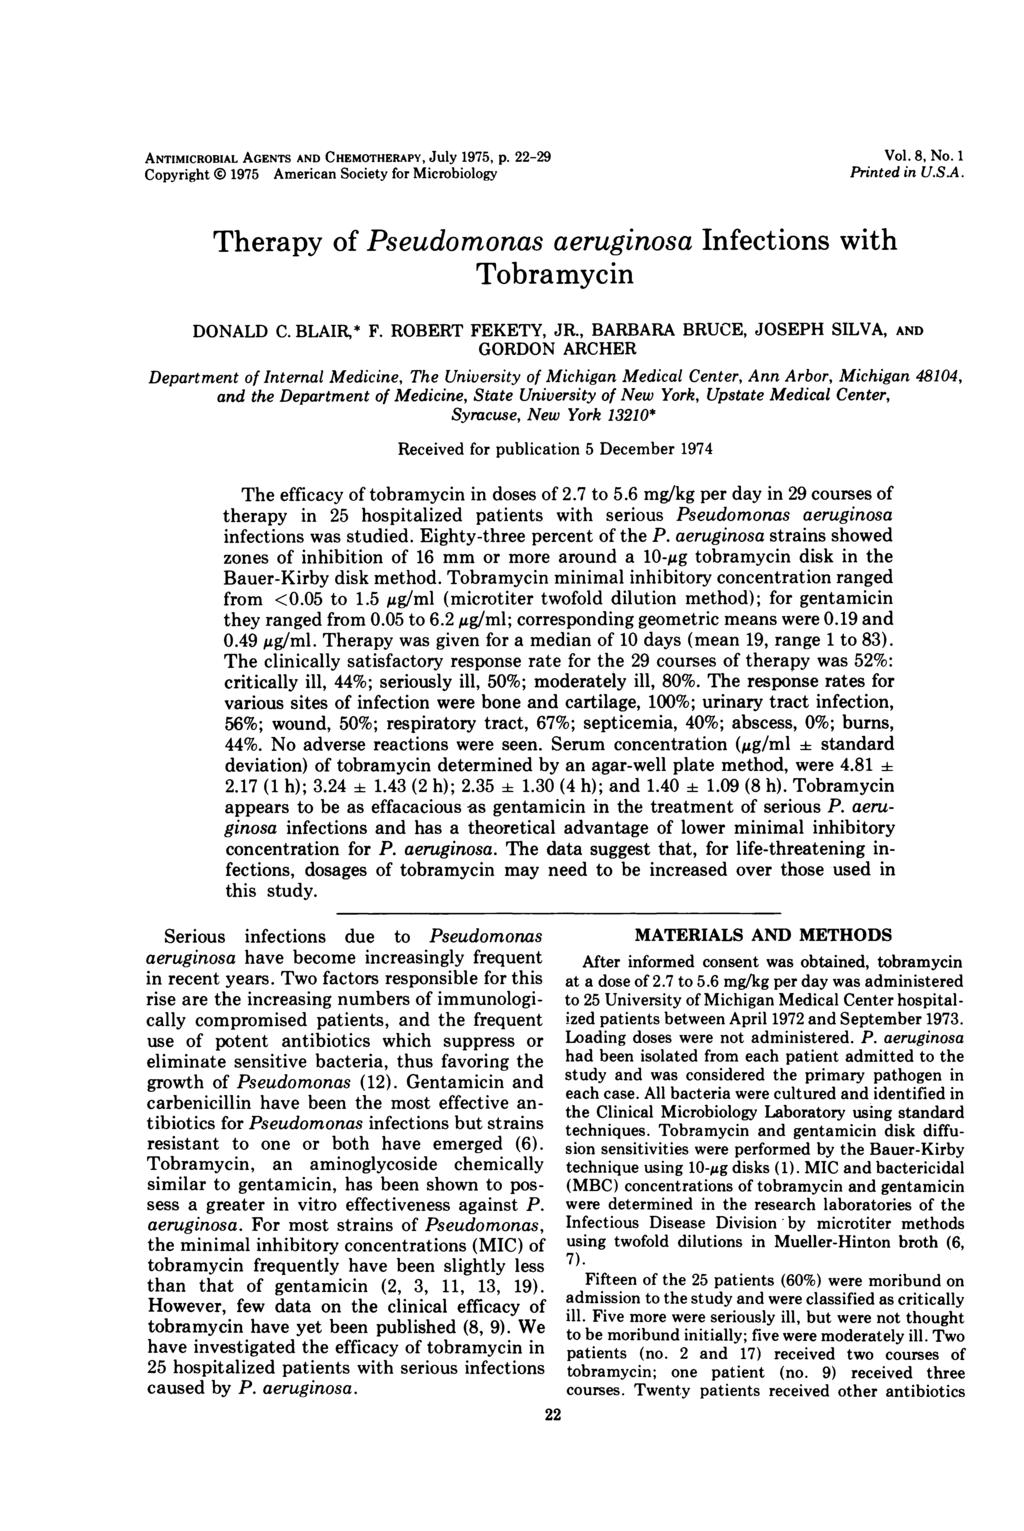 ANTIMICROBIAL AGENTS AND CHEMOTHERAPY, JUIY 75, P. -29 Copyright 75 American Society for Microbiology Vol. 8, No. 1 Printed in U.S.A. Therapy of Pseudomonas aeruginosa Infections with Tobramycin DONALD C.